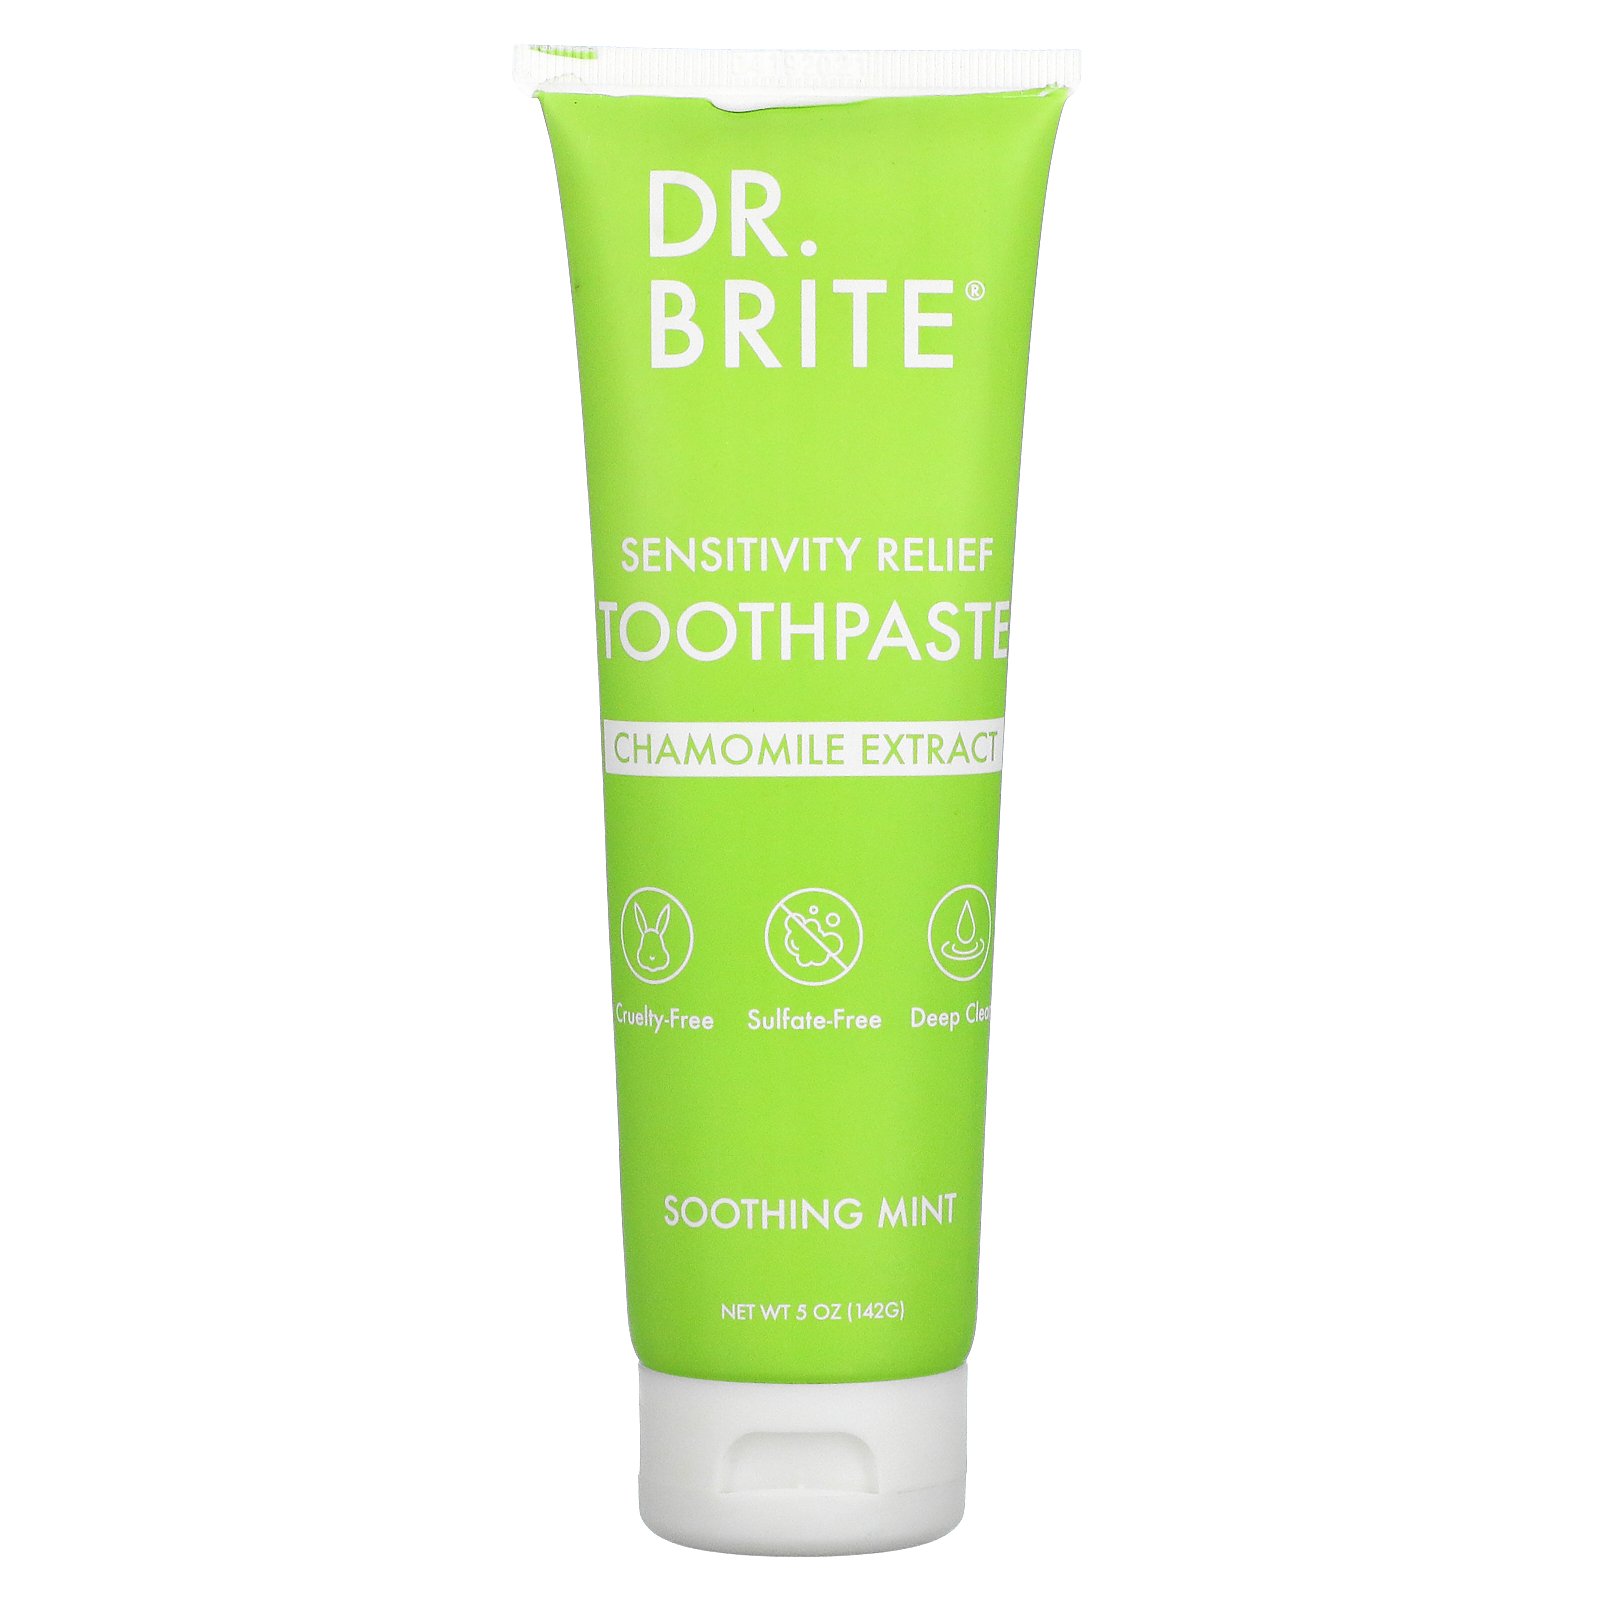 Sensitivity Relief Mint Toothpaste -brite product available at family pharmacy online buy now at qatar doha